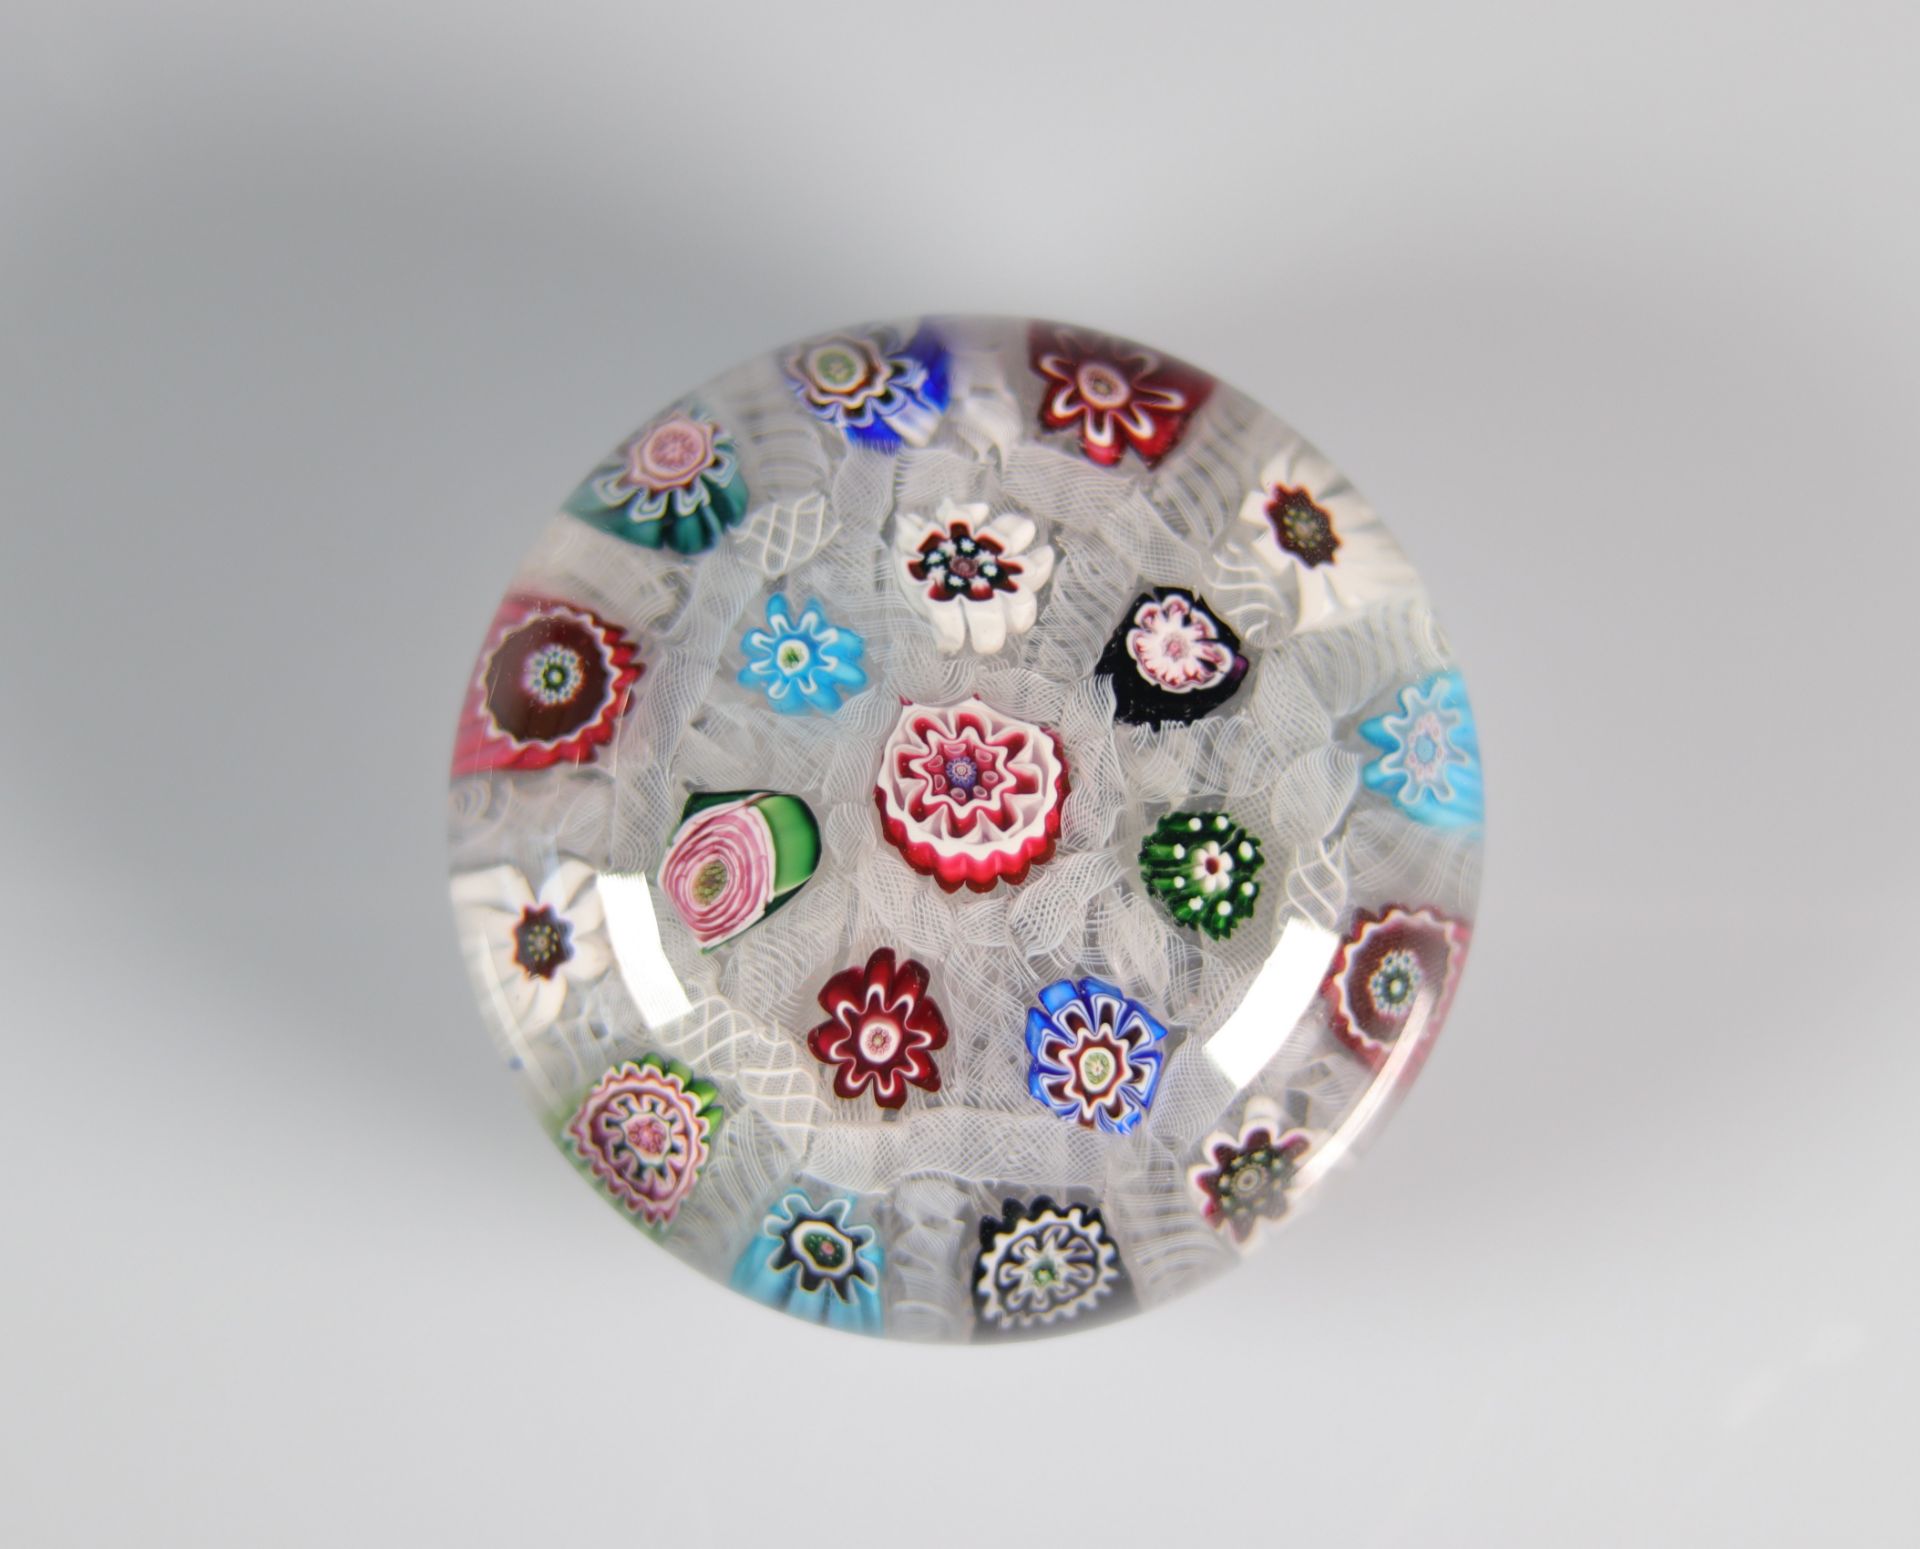 Clichy paperweight with floral decoration